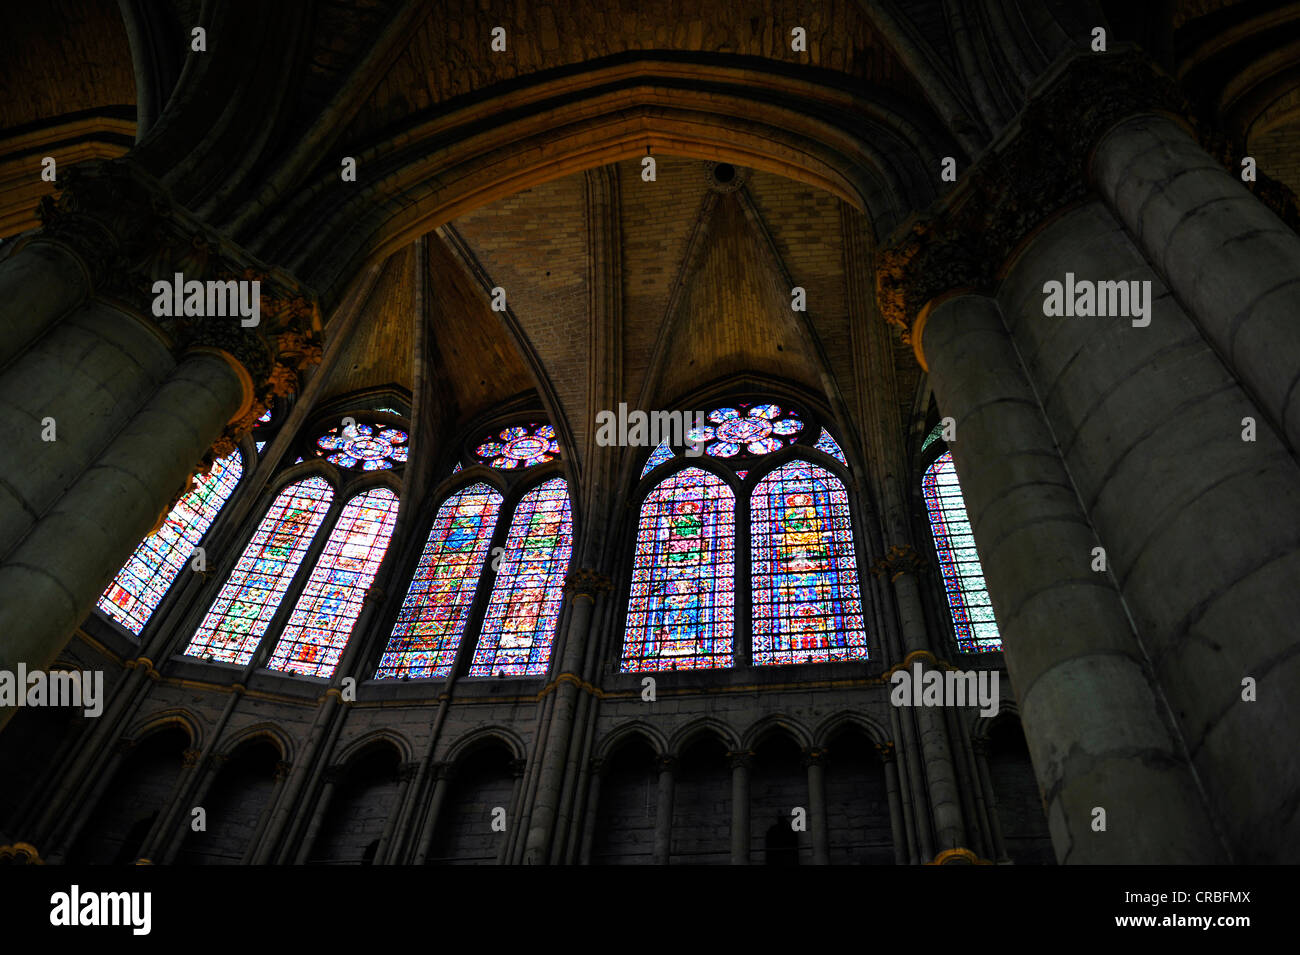 Historical stained glass window, Notre Dame, Unesco World Heritage Site, Reims, Champagne, France, Europe Stock Photo